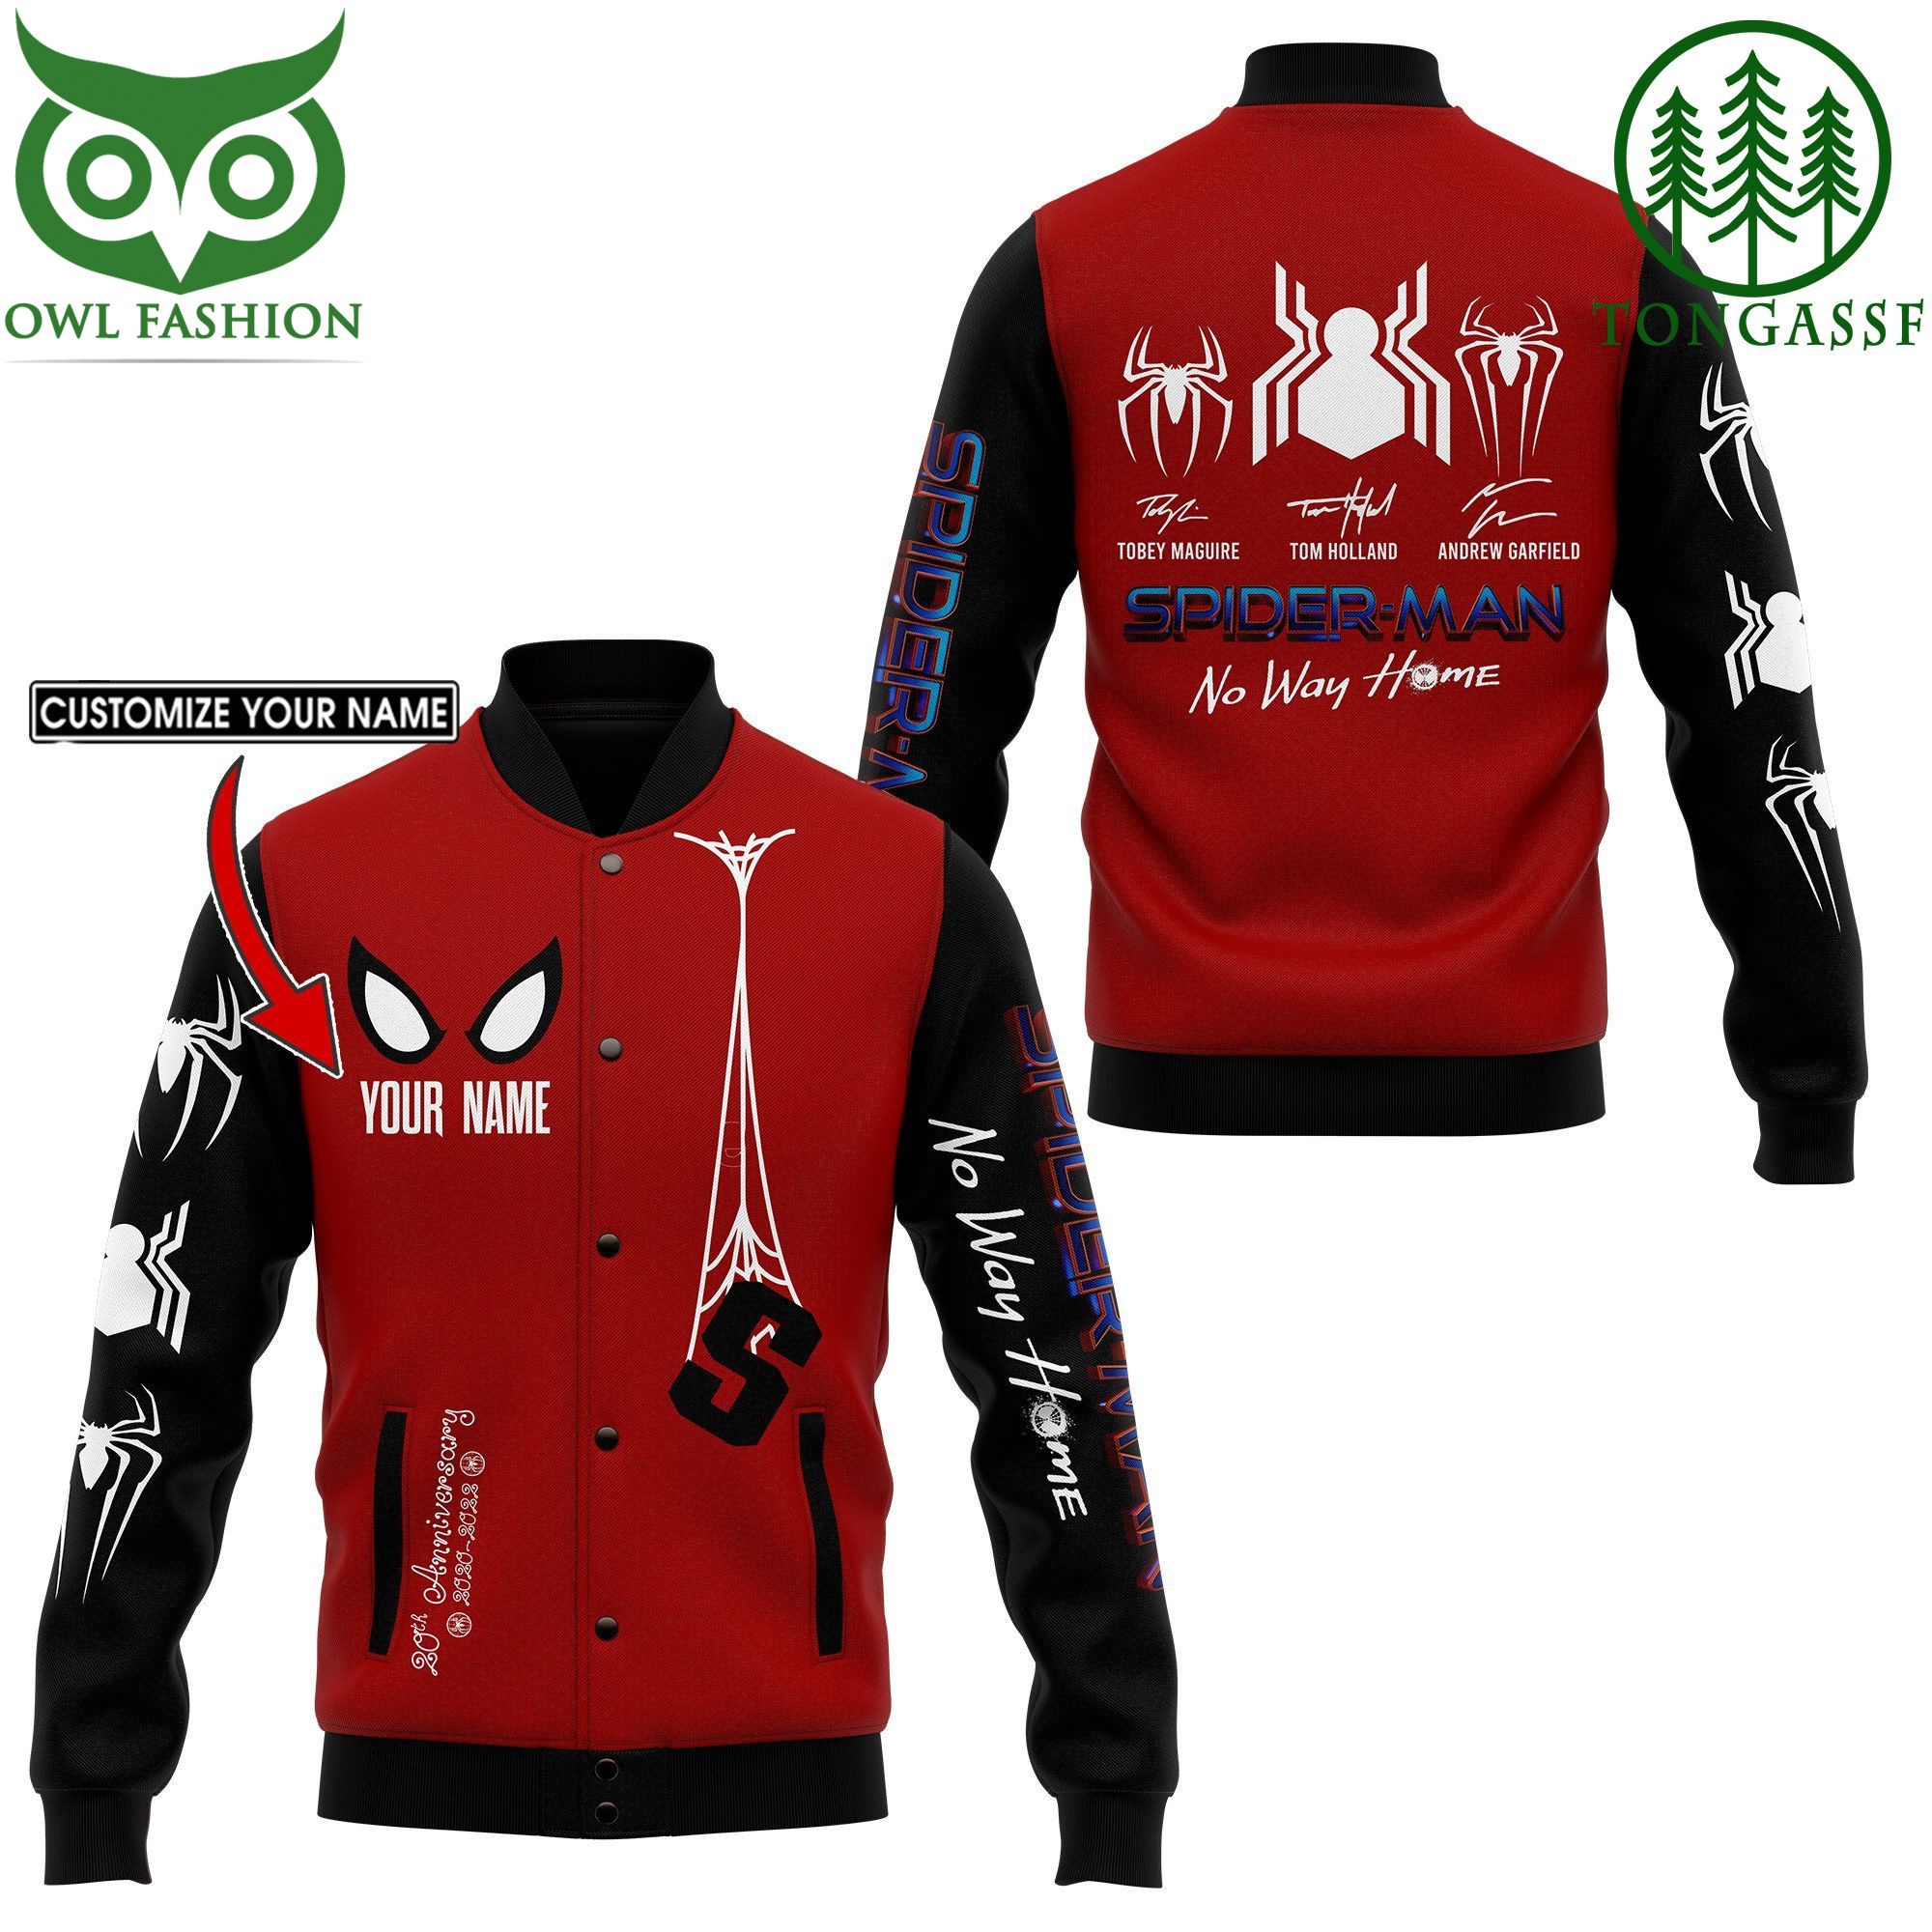 28 Spiderman No way home personalized bomber jacket